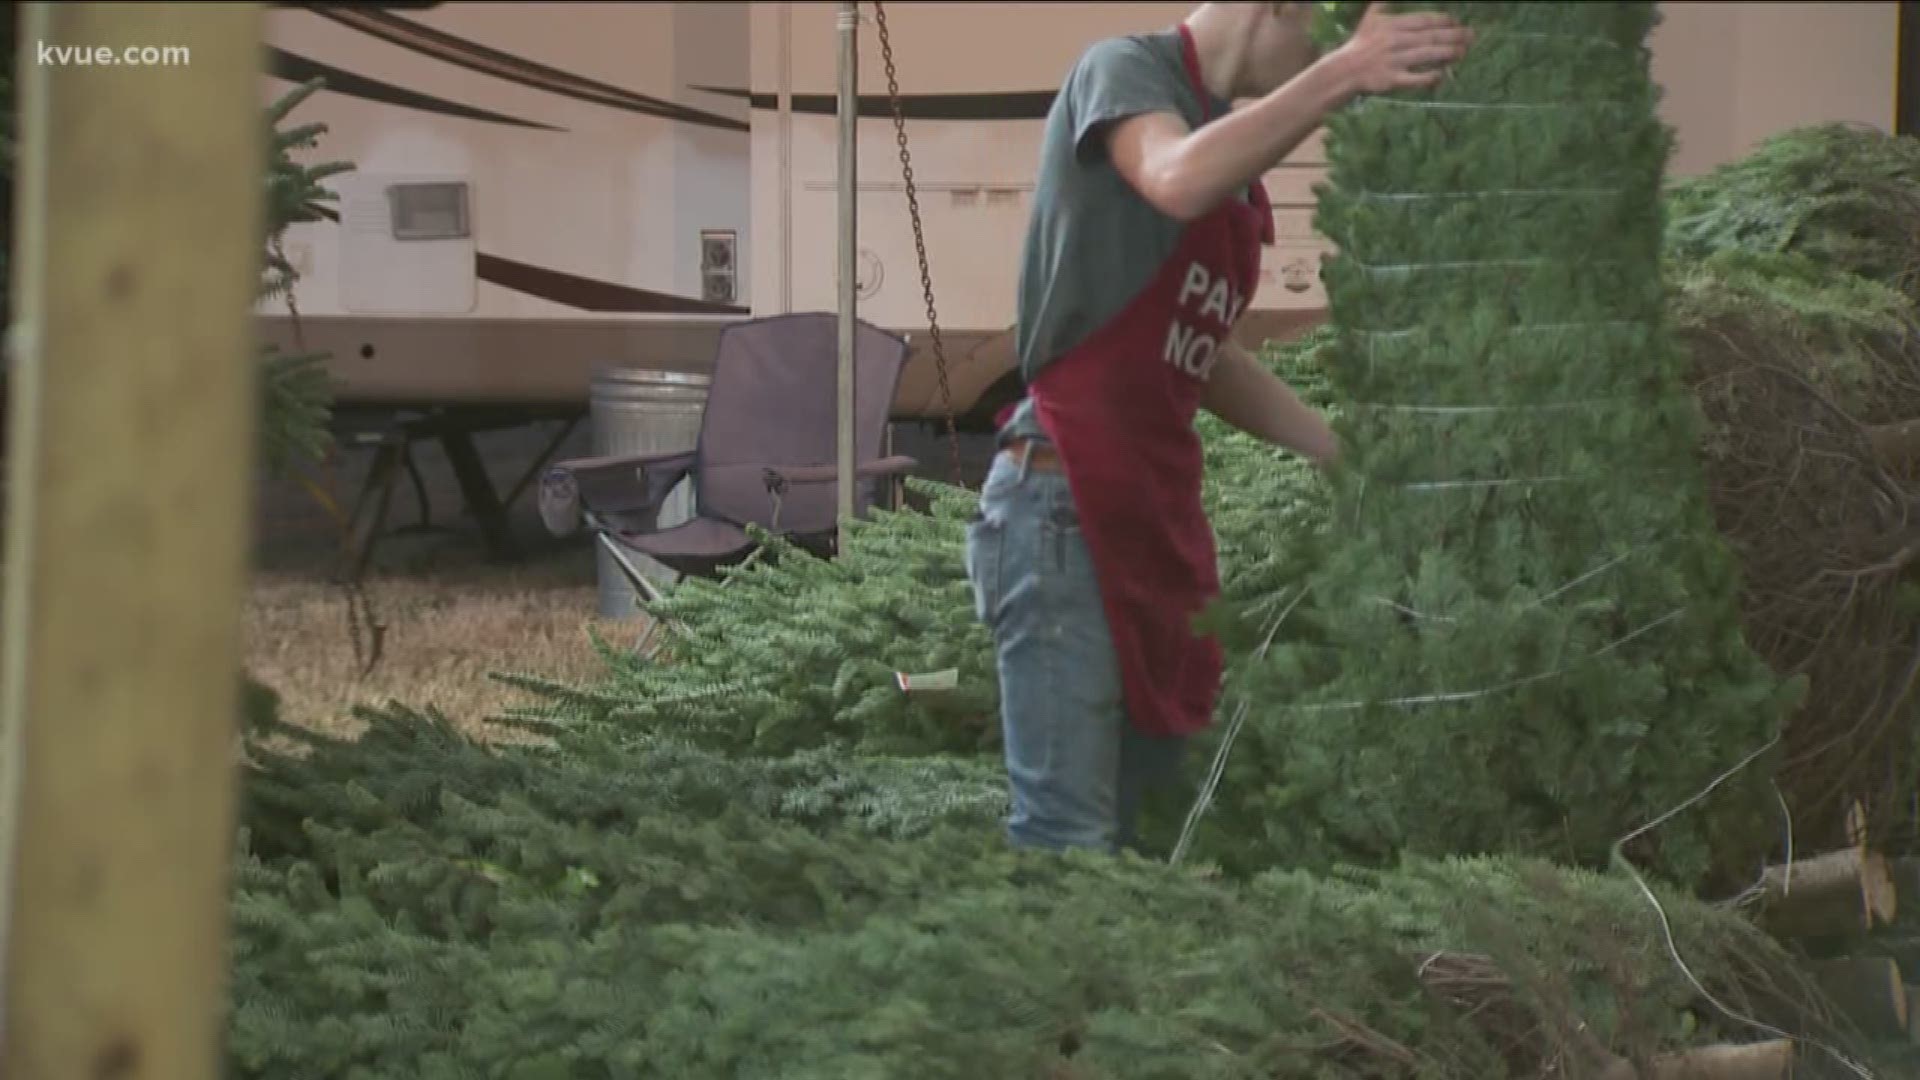 With Thanksgiving in the rearview, picking out the Christmas tree is the focus for many families. But as KVUE's Luis de Leon explains, prices on some trees are a lot high than last year.